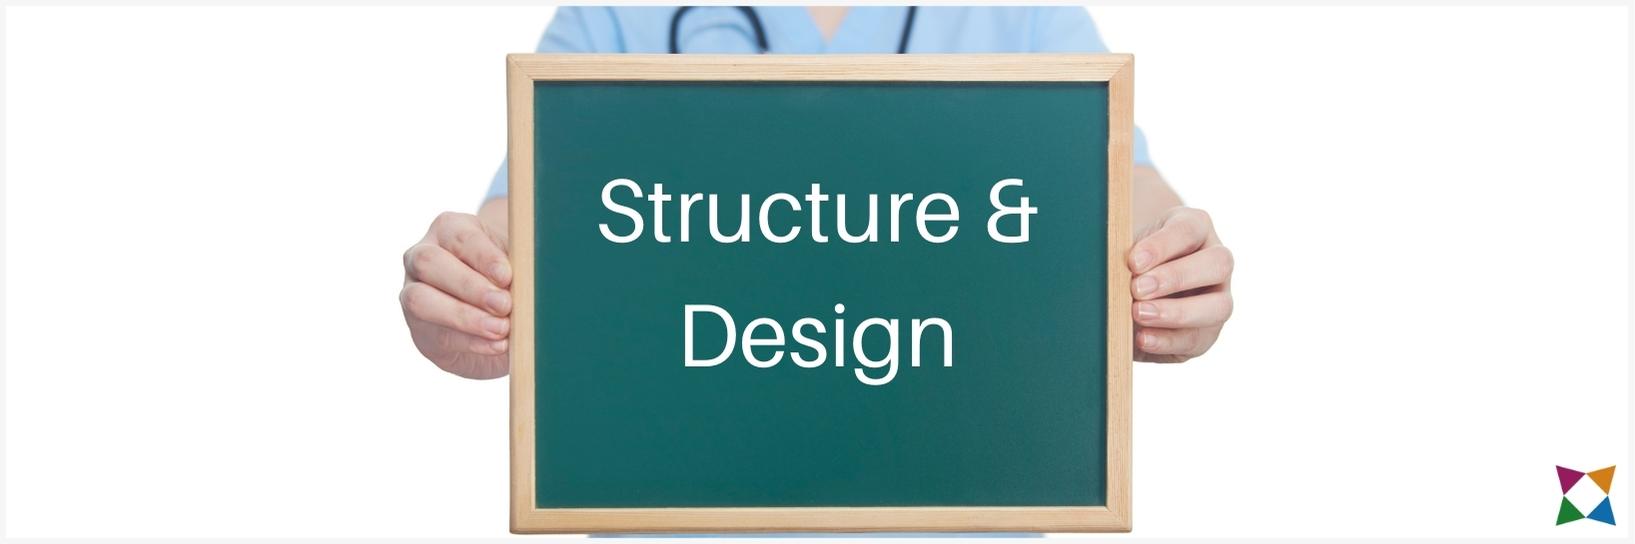 icev-aes-anatomy-physiology-curriculum-structure-design